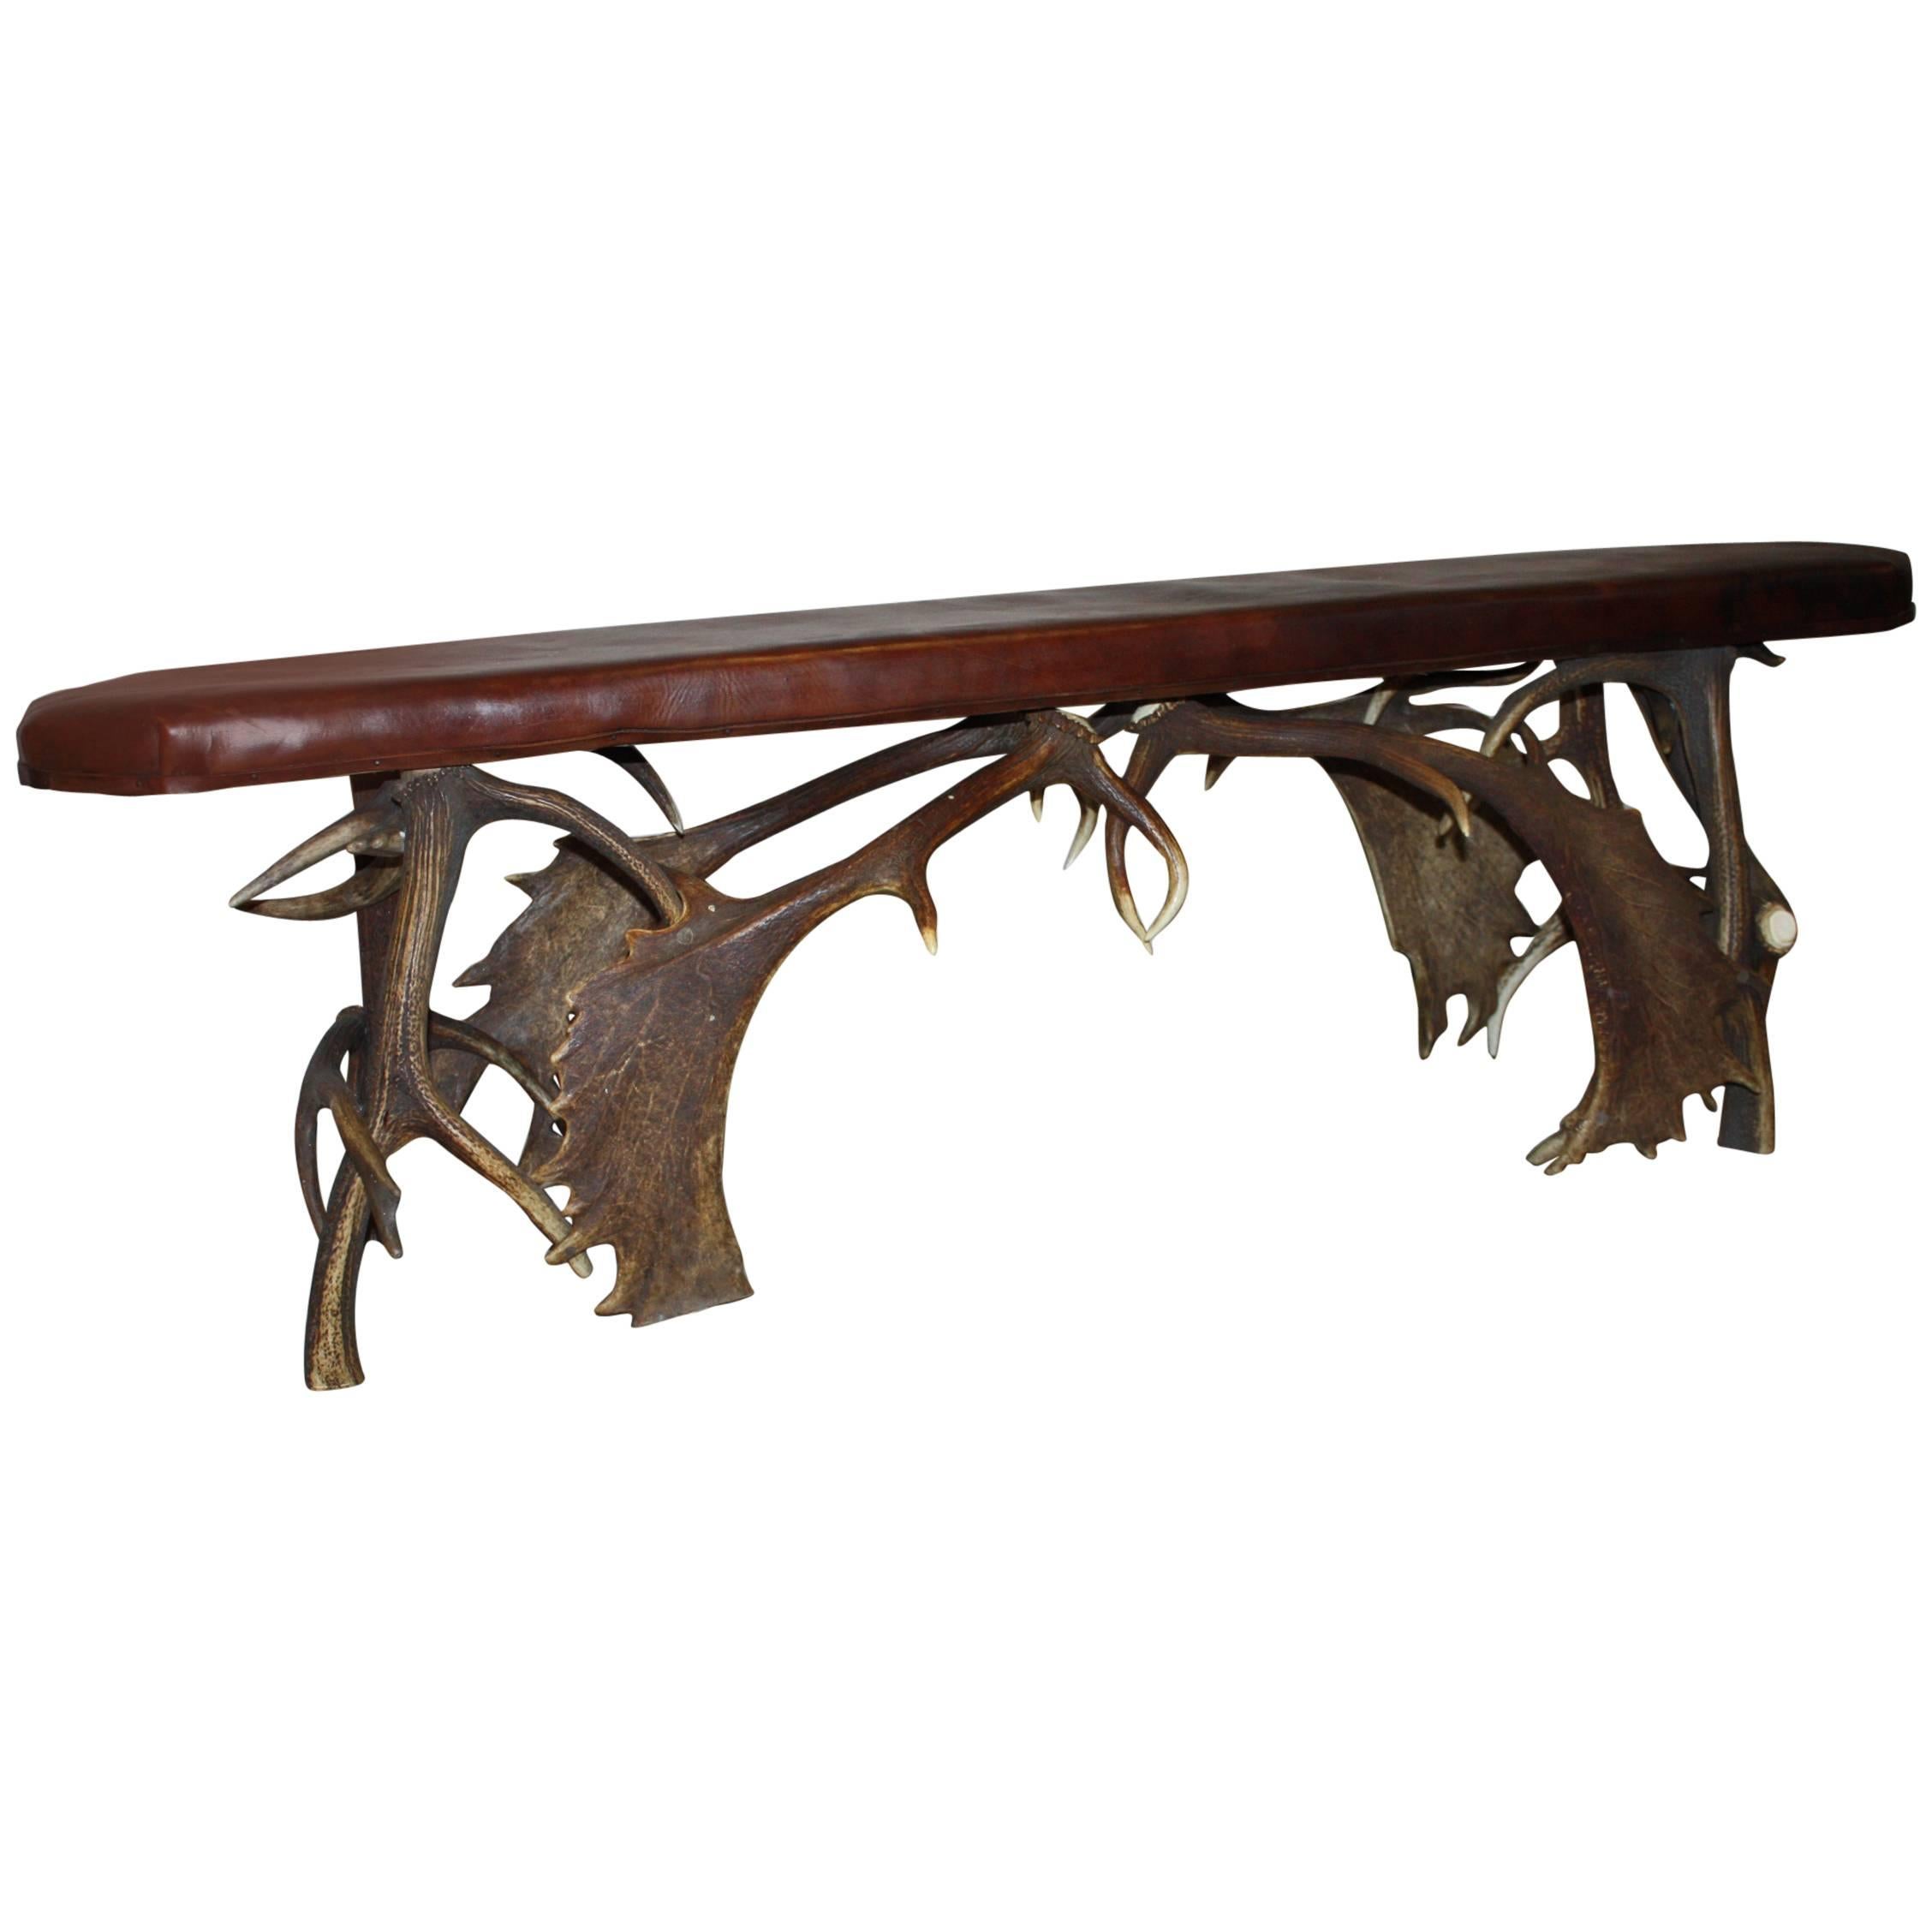 Fallow Deer Antler Bench with Leather Top